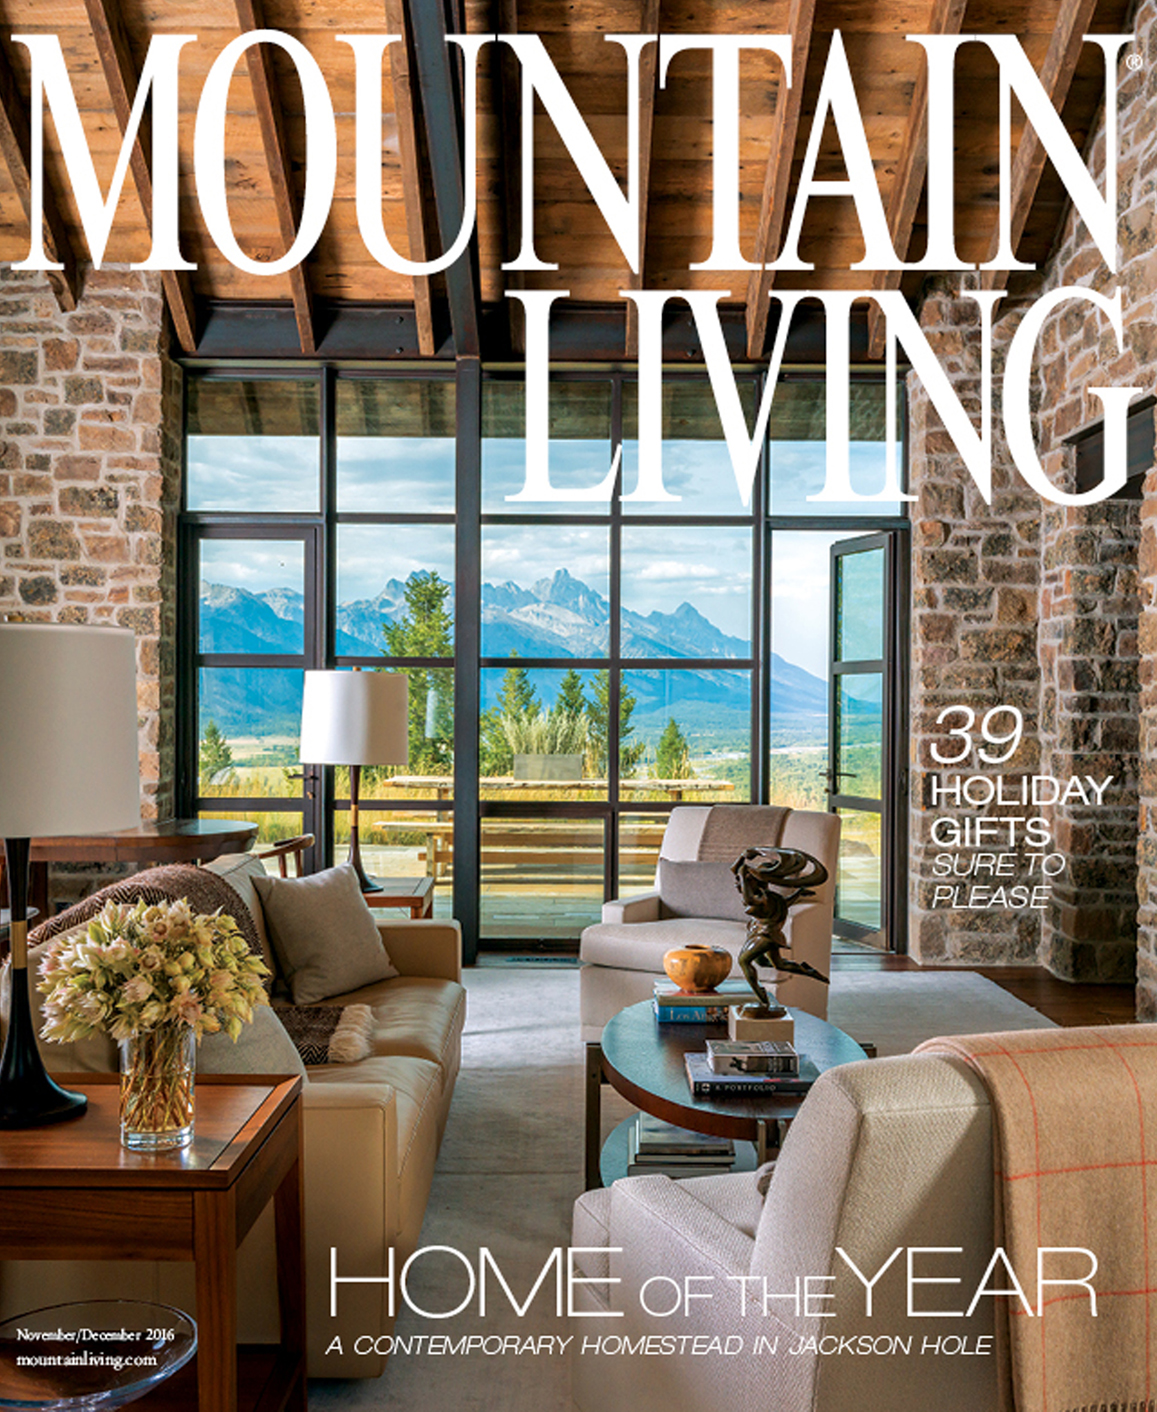 Mountain Living has featured its 22nd Home of the Year winner, a contemporary homestead near Jackson, Wyoming, by JLF Design Build, in the November/December 2016 issue.